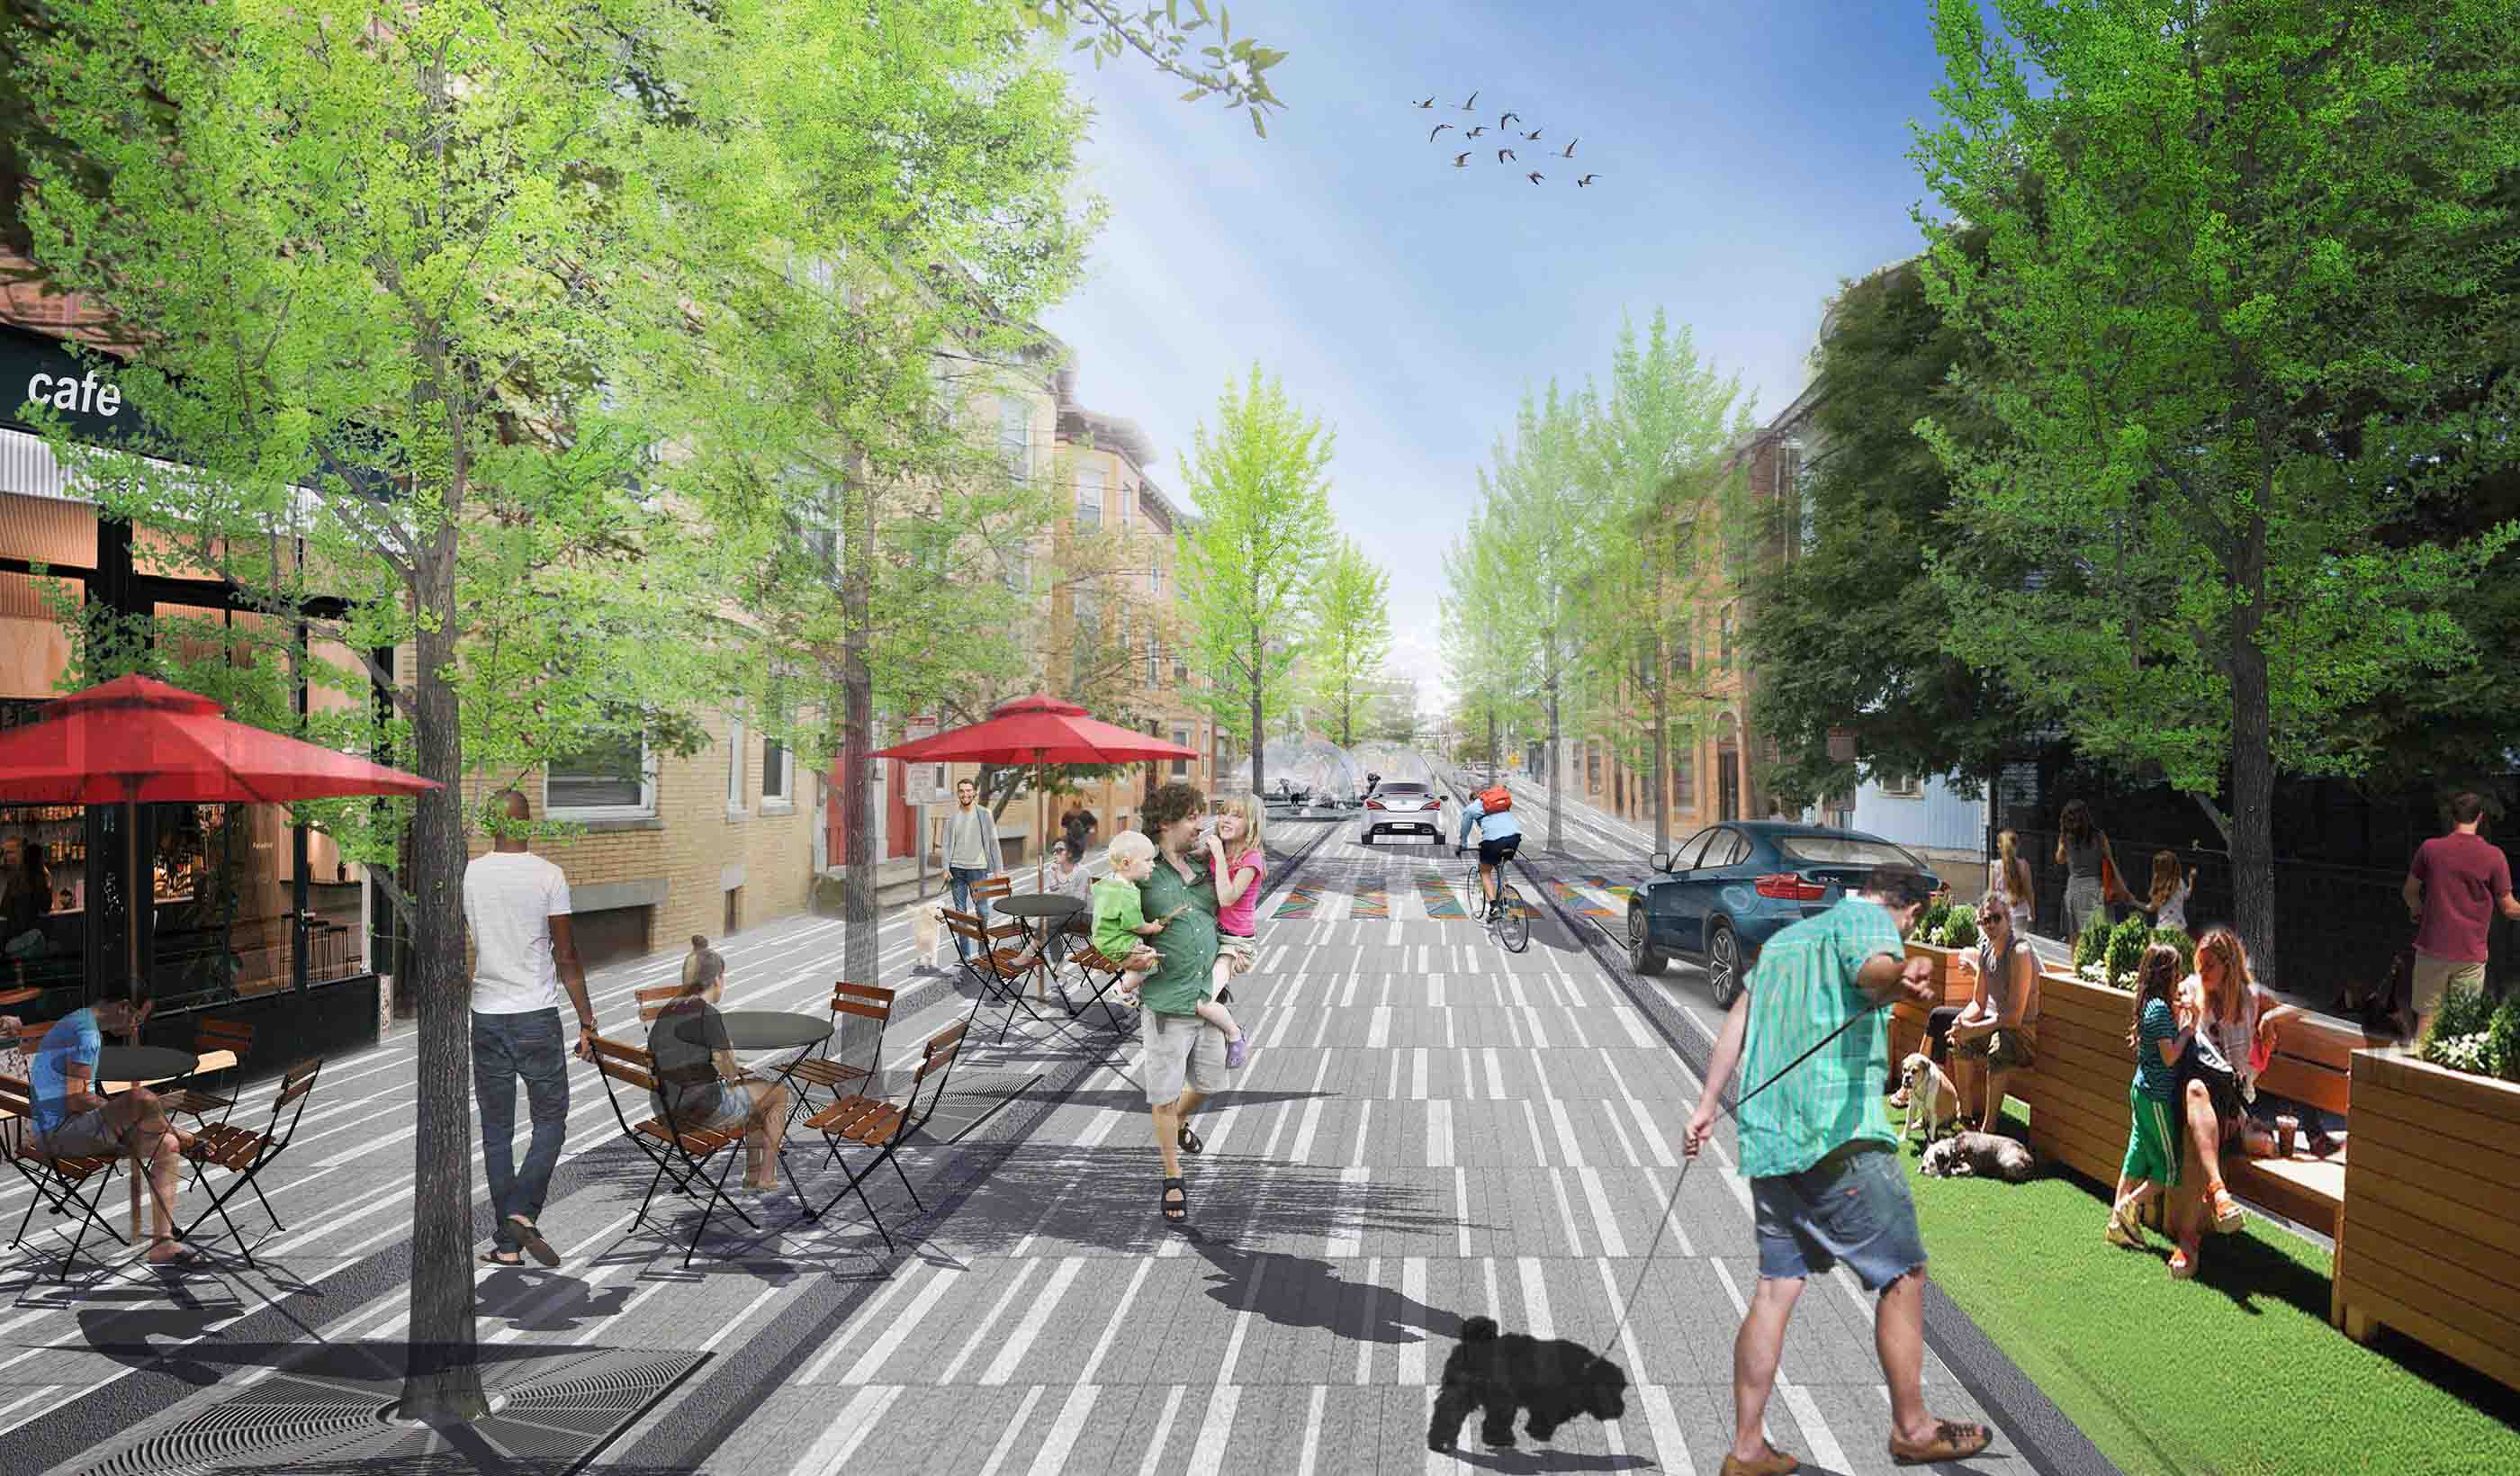 Beyond Complete Streets: Could COVID-19 help transform our roads into places for people?